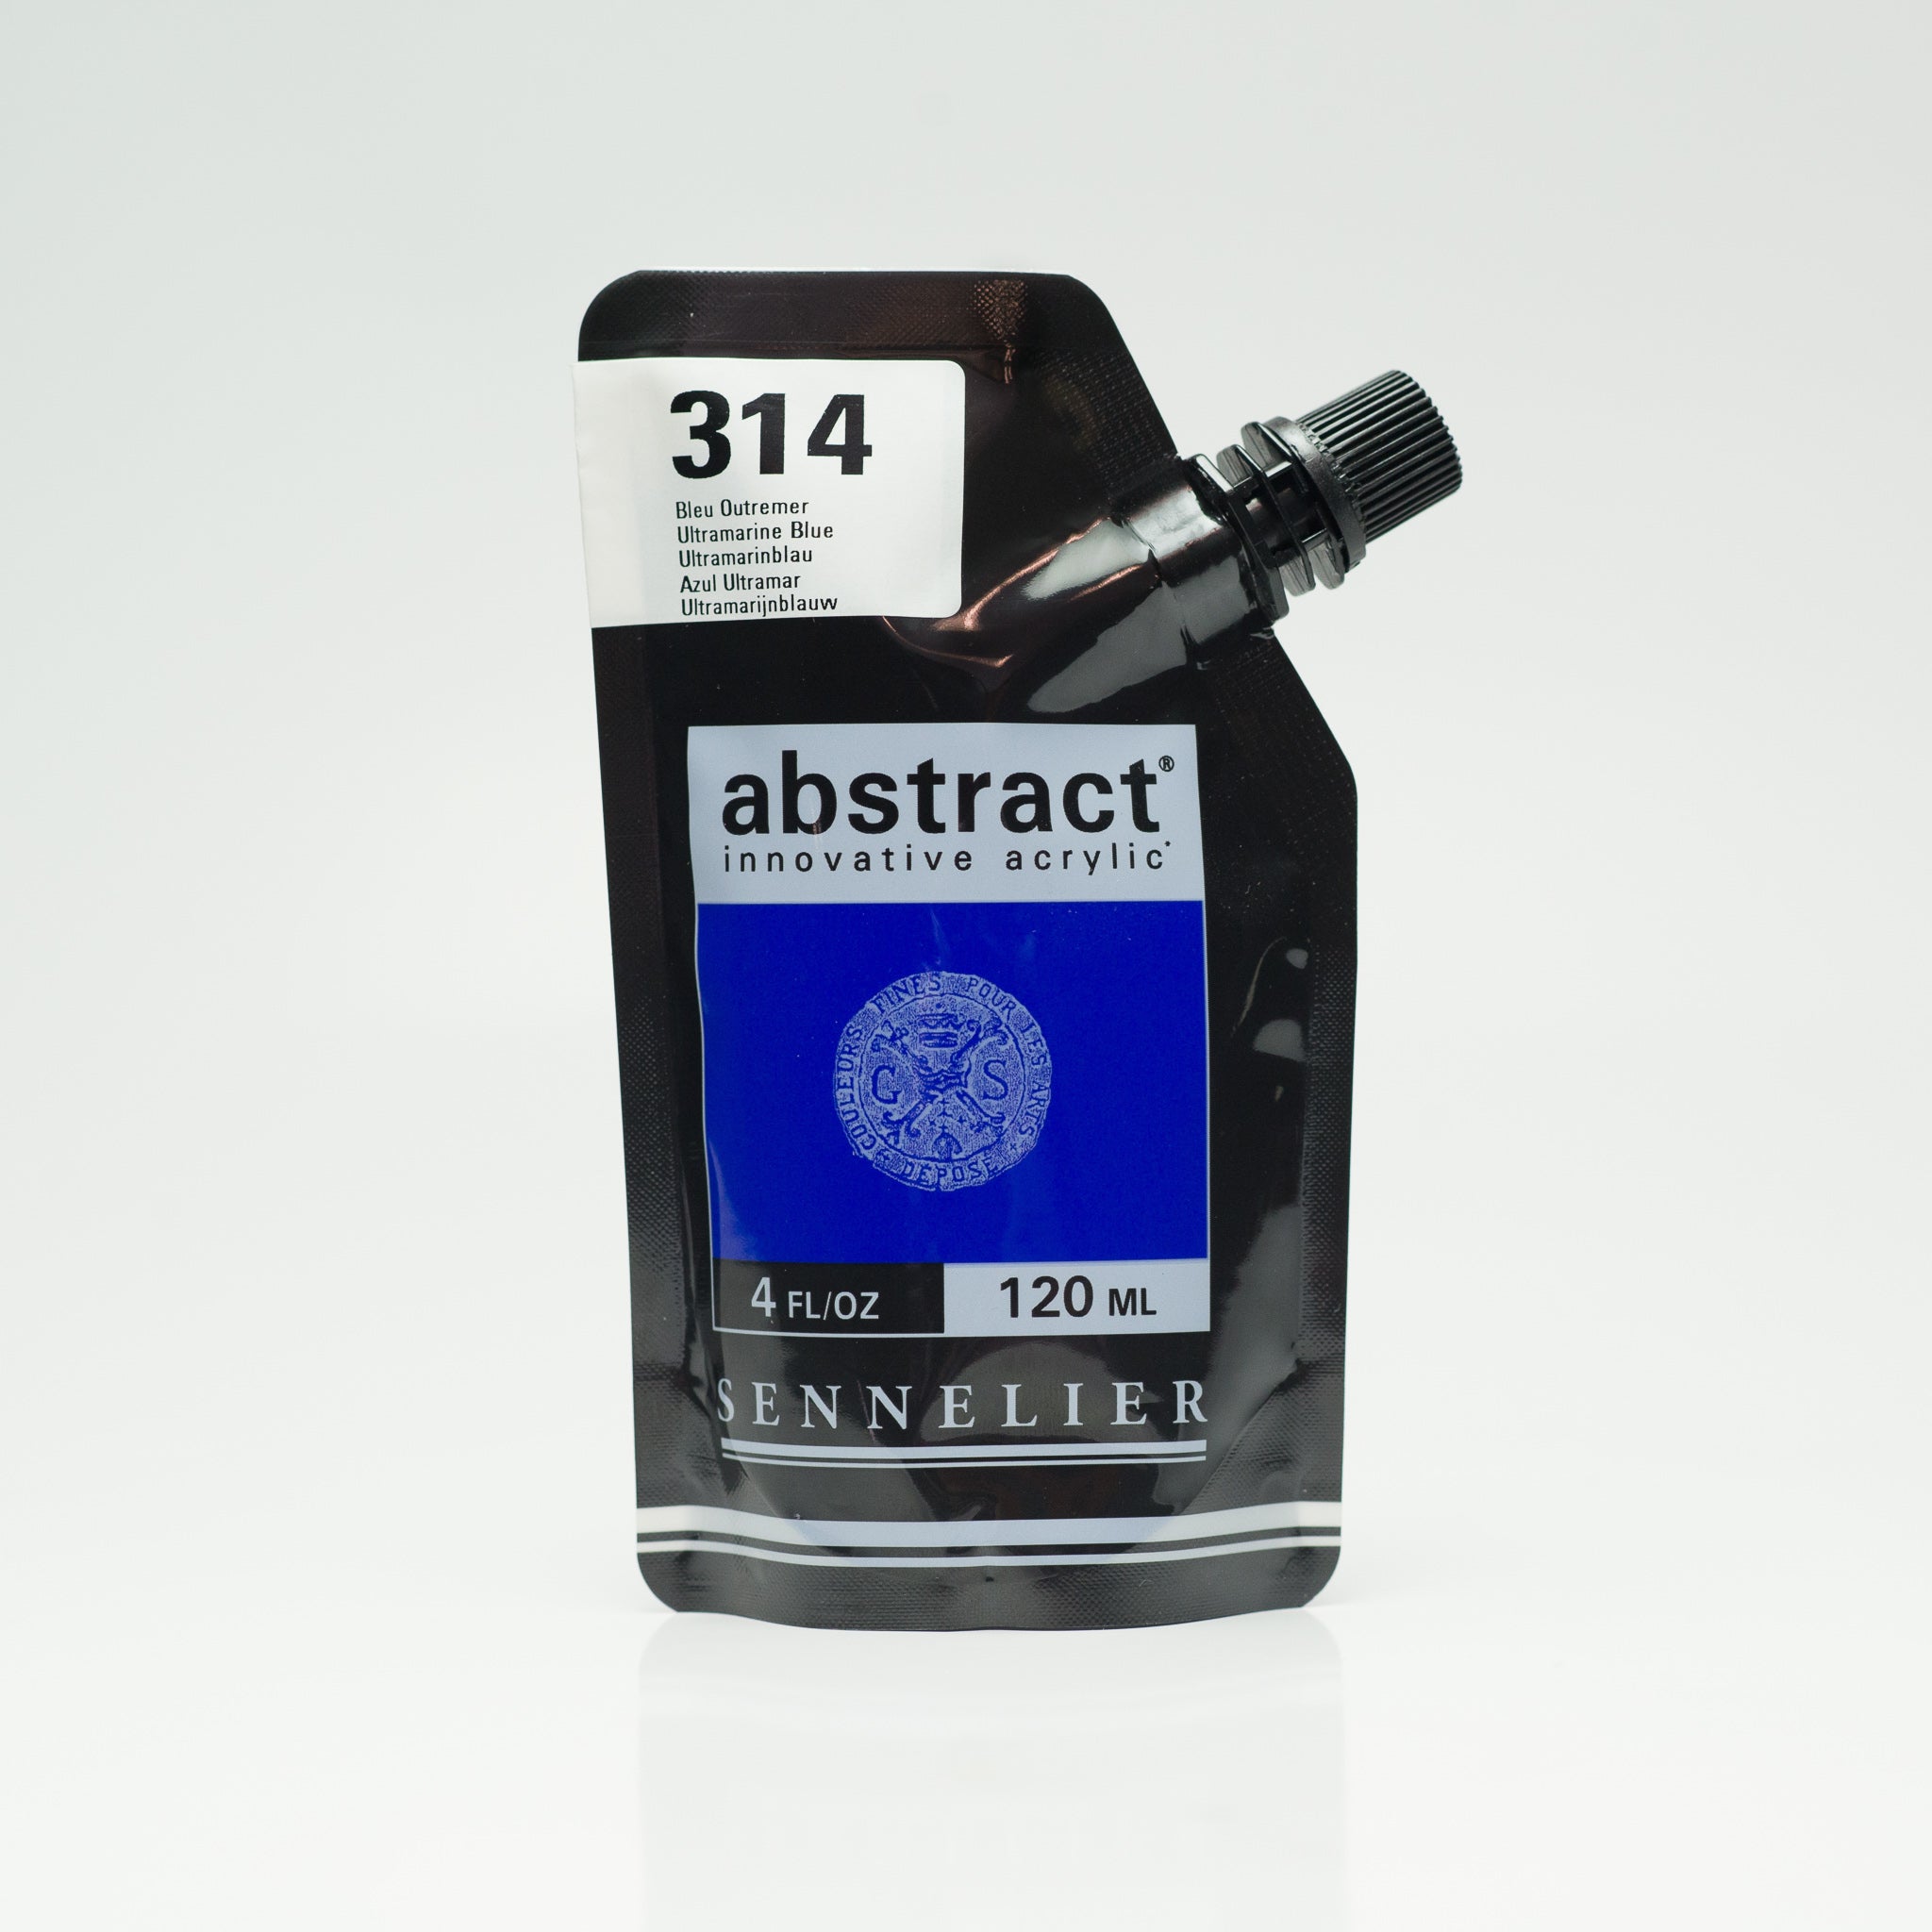 Sennelier Abstract Acrylic Satin 120ml - Melbourne Etching Supplies